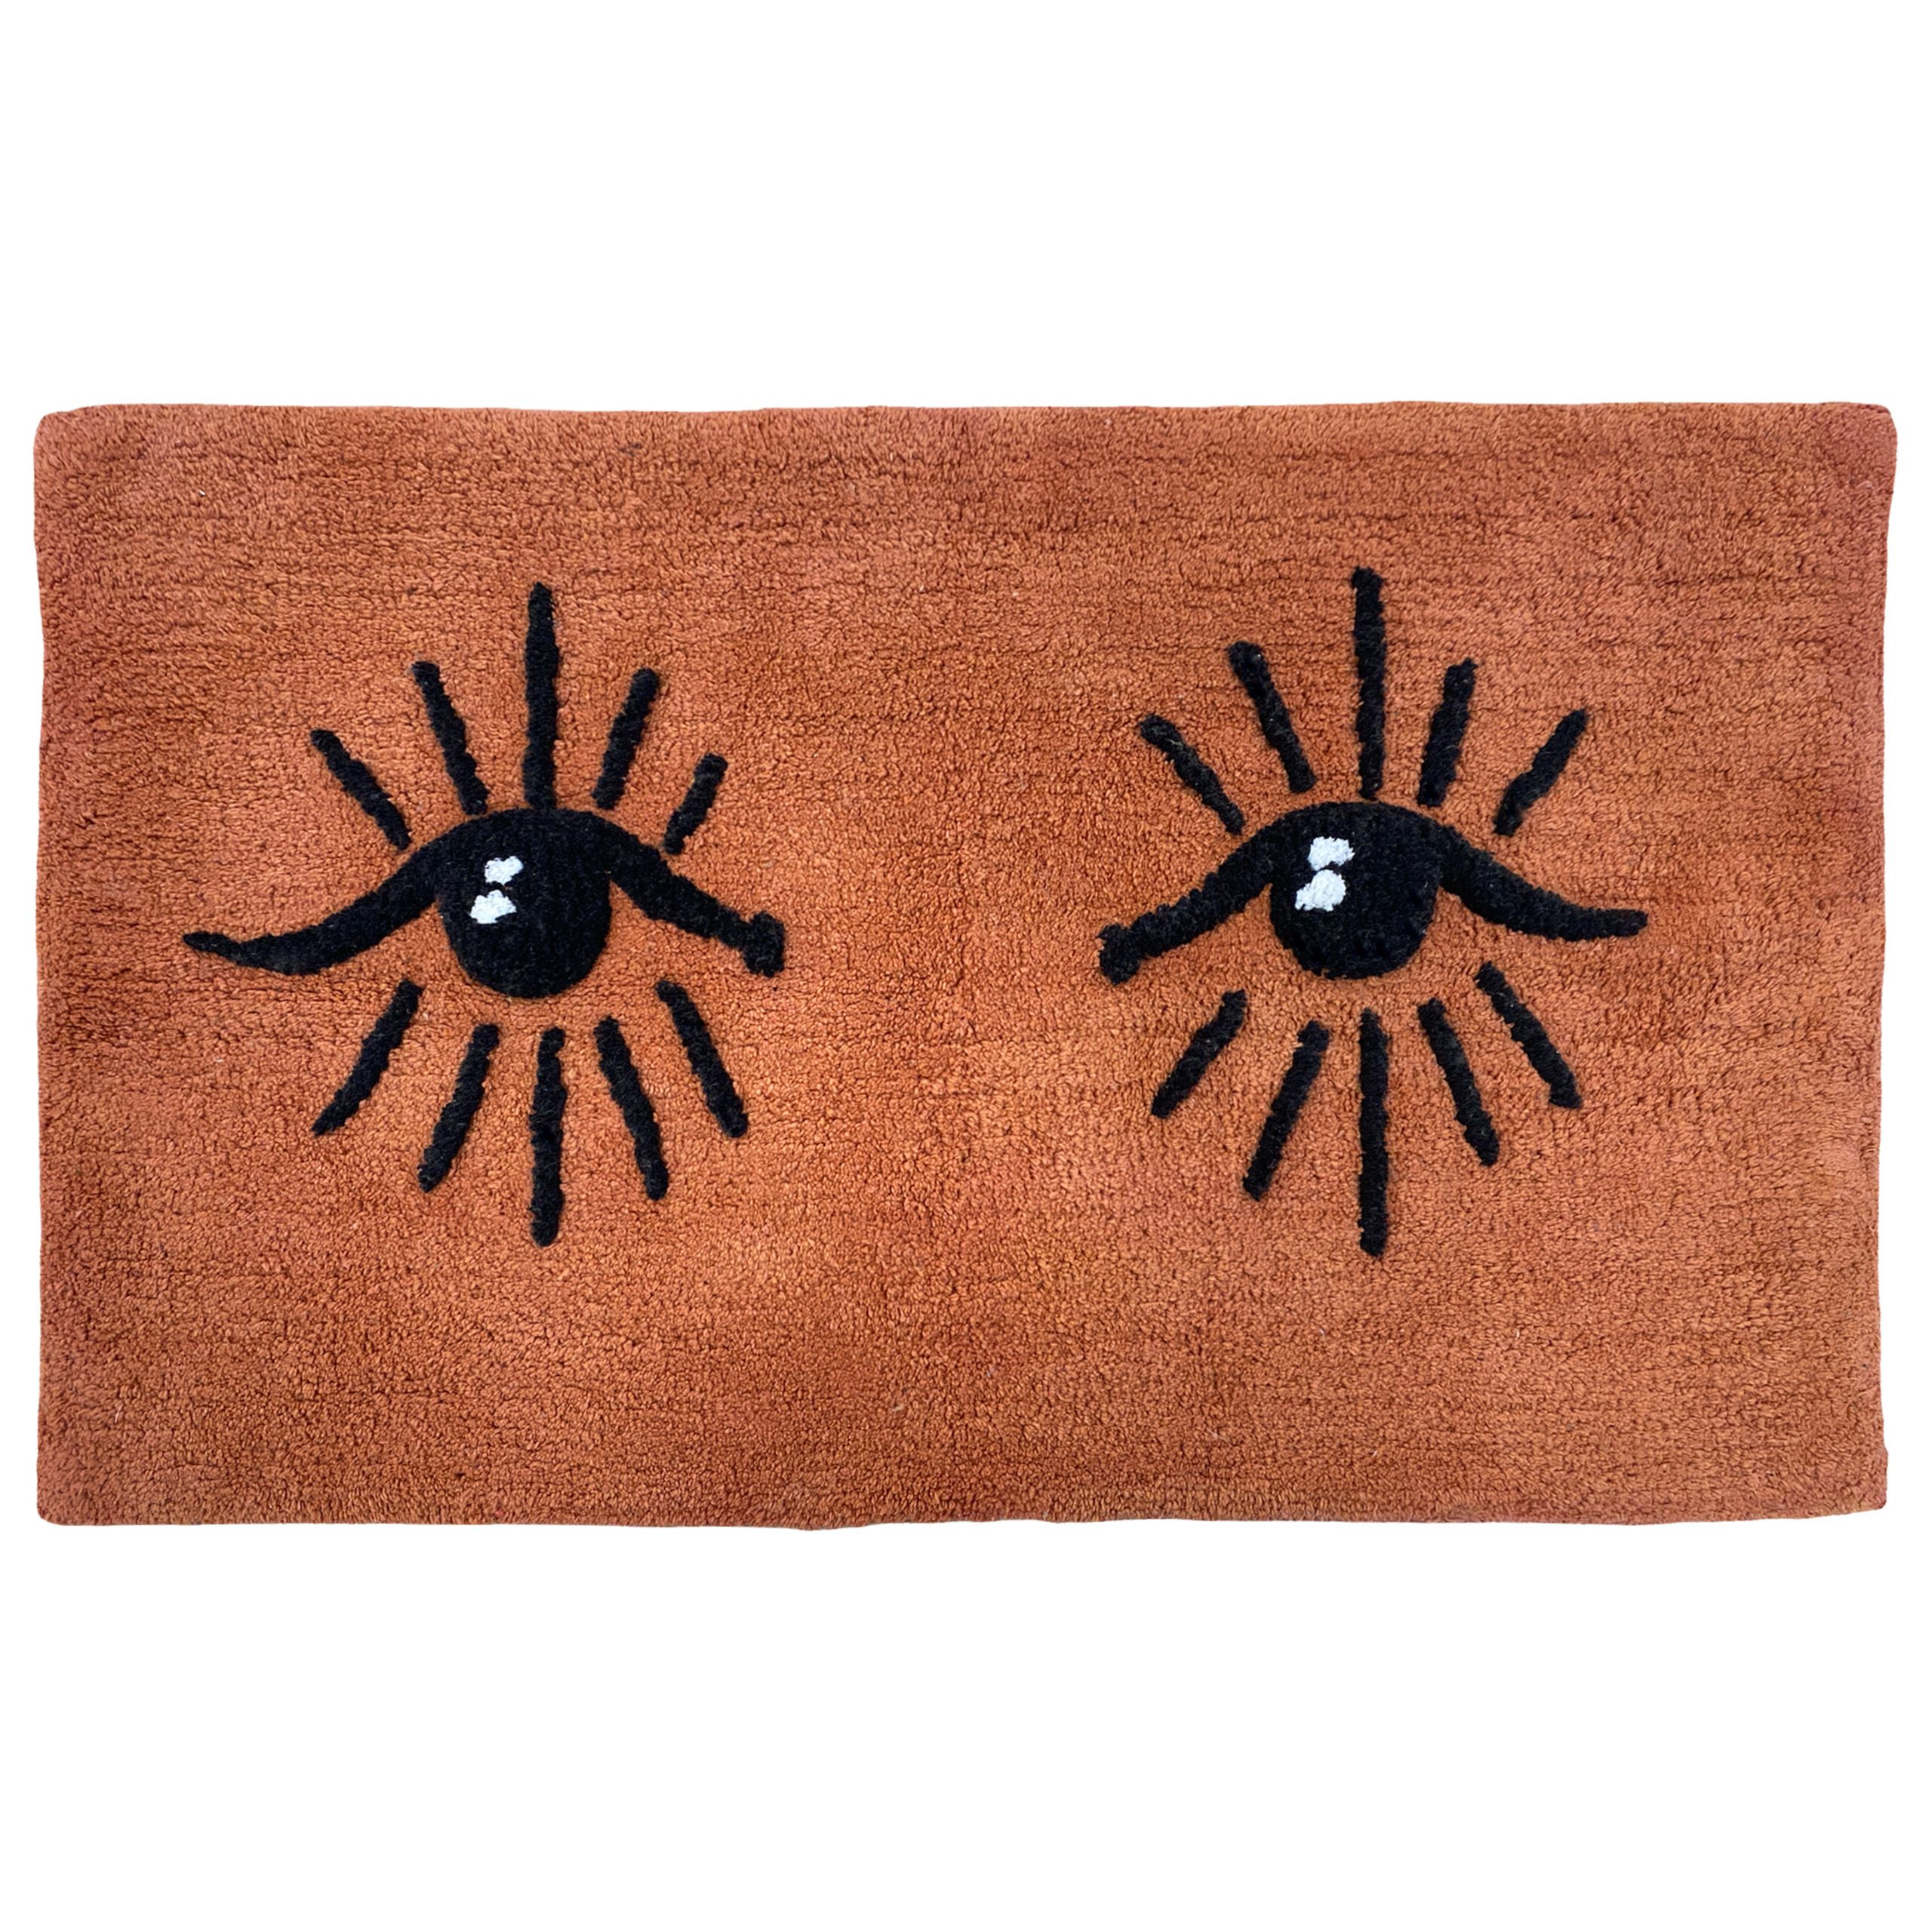 Featuring an abstract eye design, in three stunning colourways. Made from 100% Cotton, making this bath mat incredibly soft under foot. This bath mat has an anti-slip quality, keeping it securely in place on your bathroom floor. The 1800 GSM ensures this bath mat is super absorbent preventing post-bath or shower puddles.